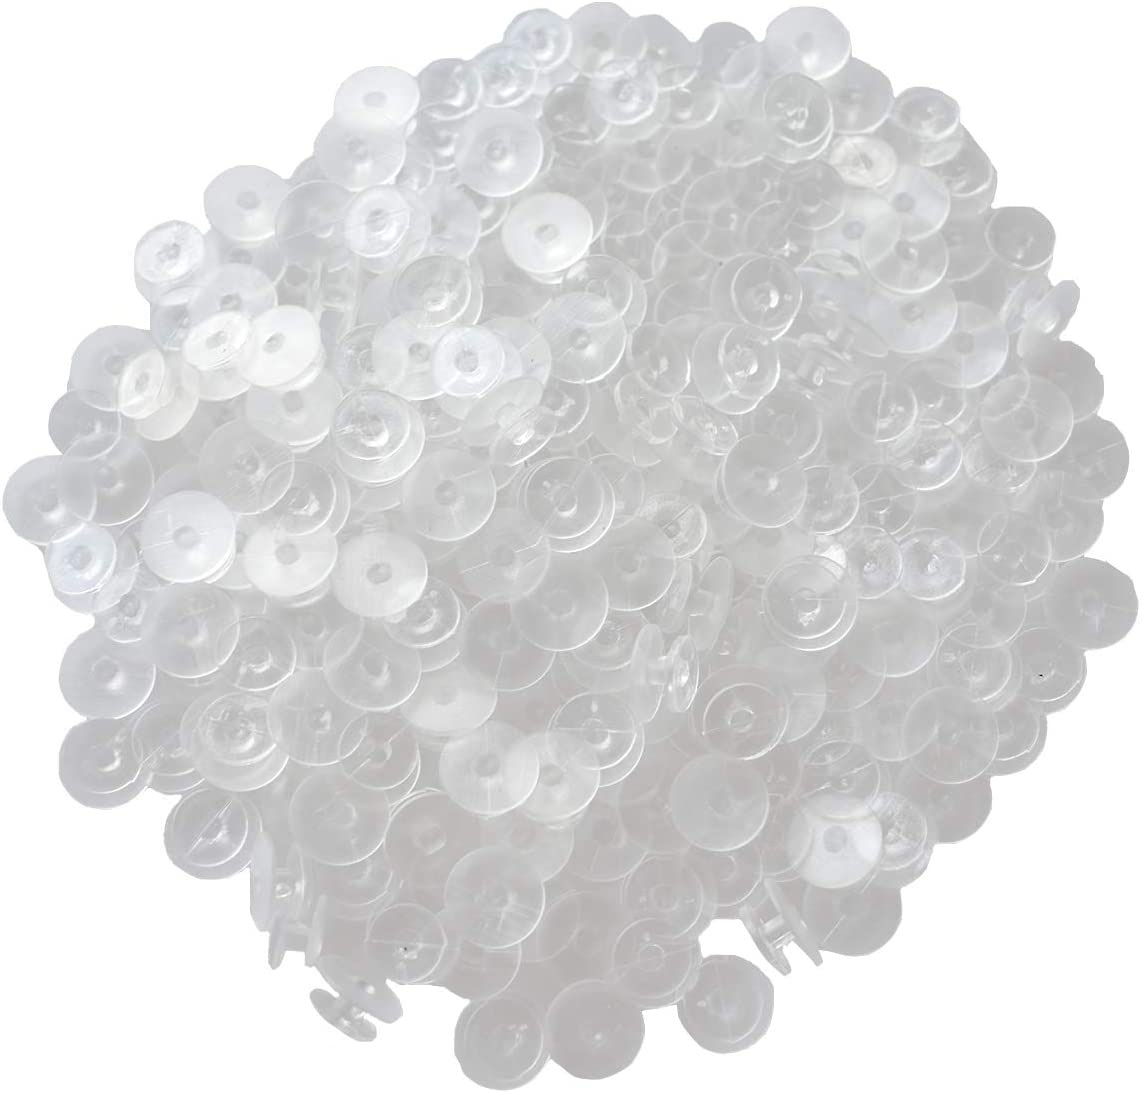 Shoe Charm Blanks - 12mm Clear Back Buttons for Crocs - Make your own shoe  charms! - with 10mm Glue Pad - 20 pcs set